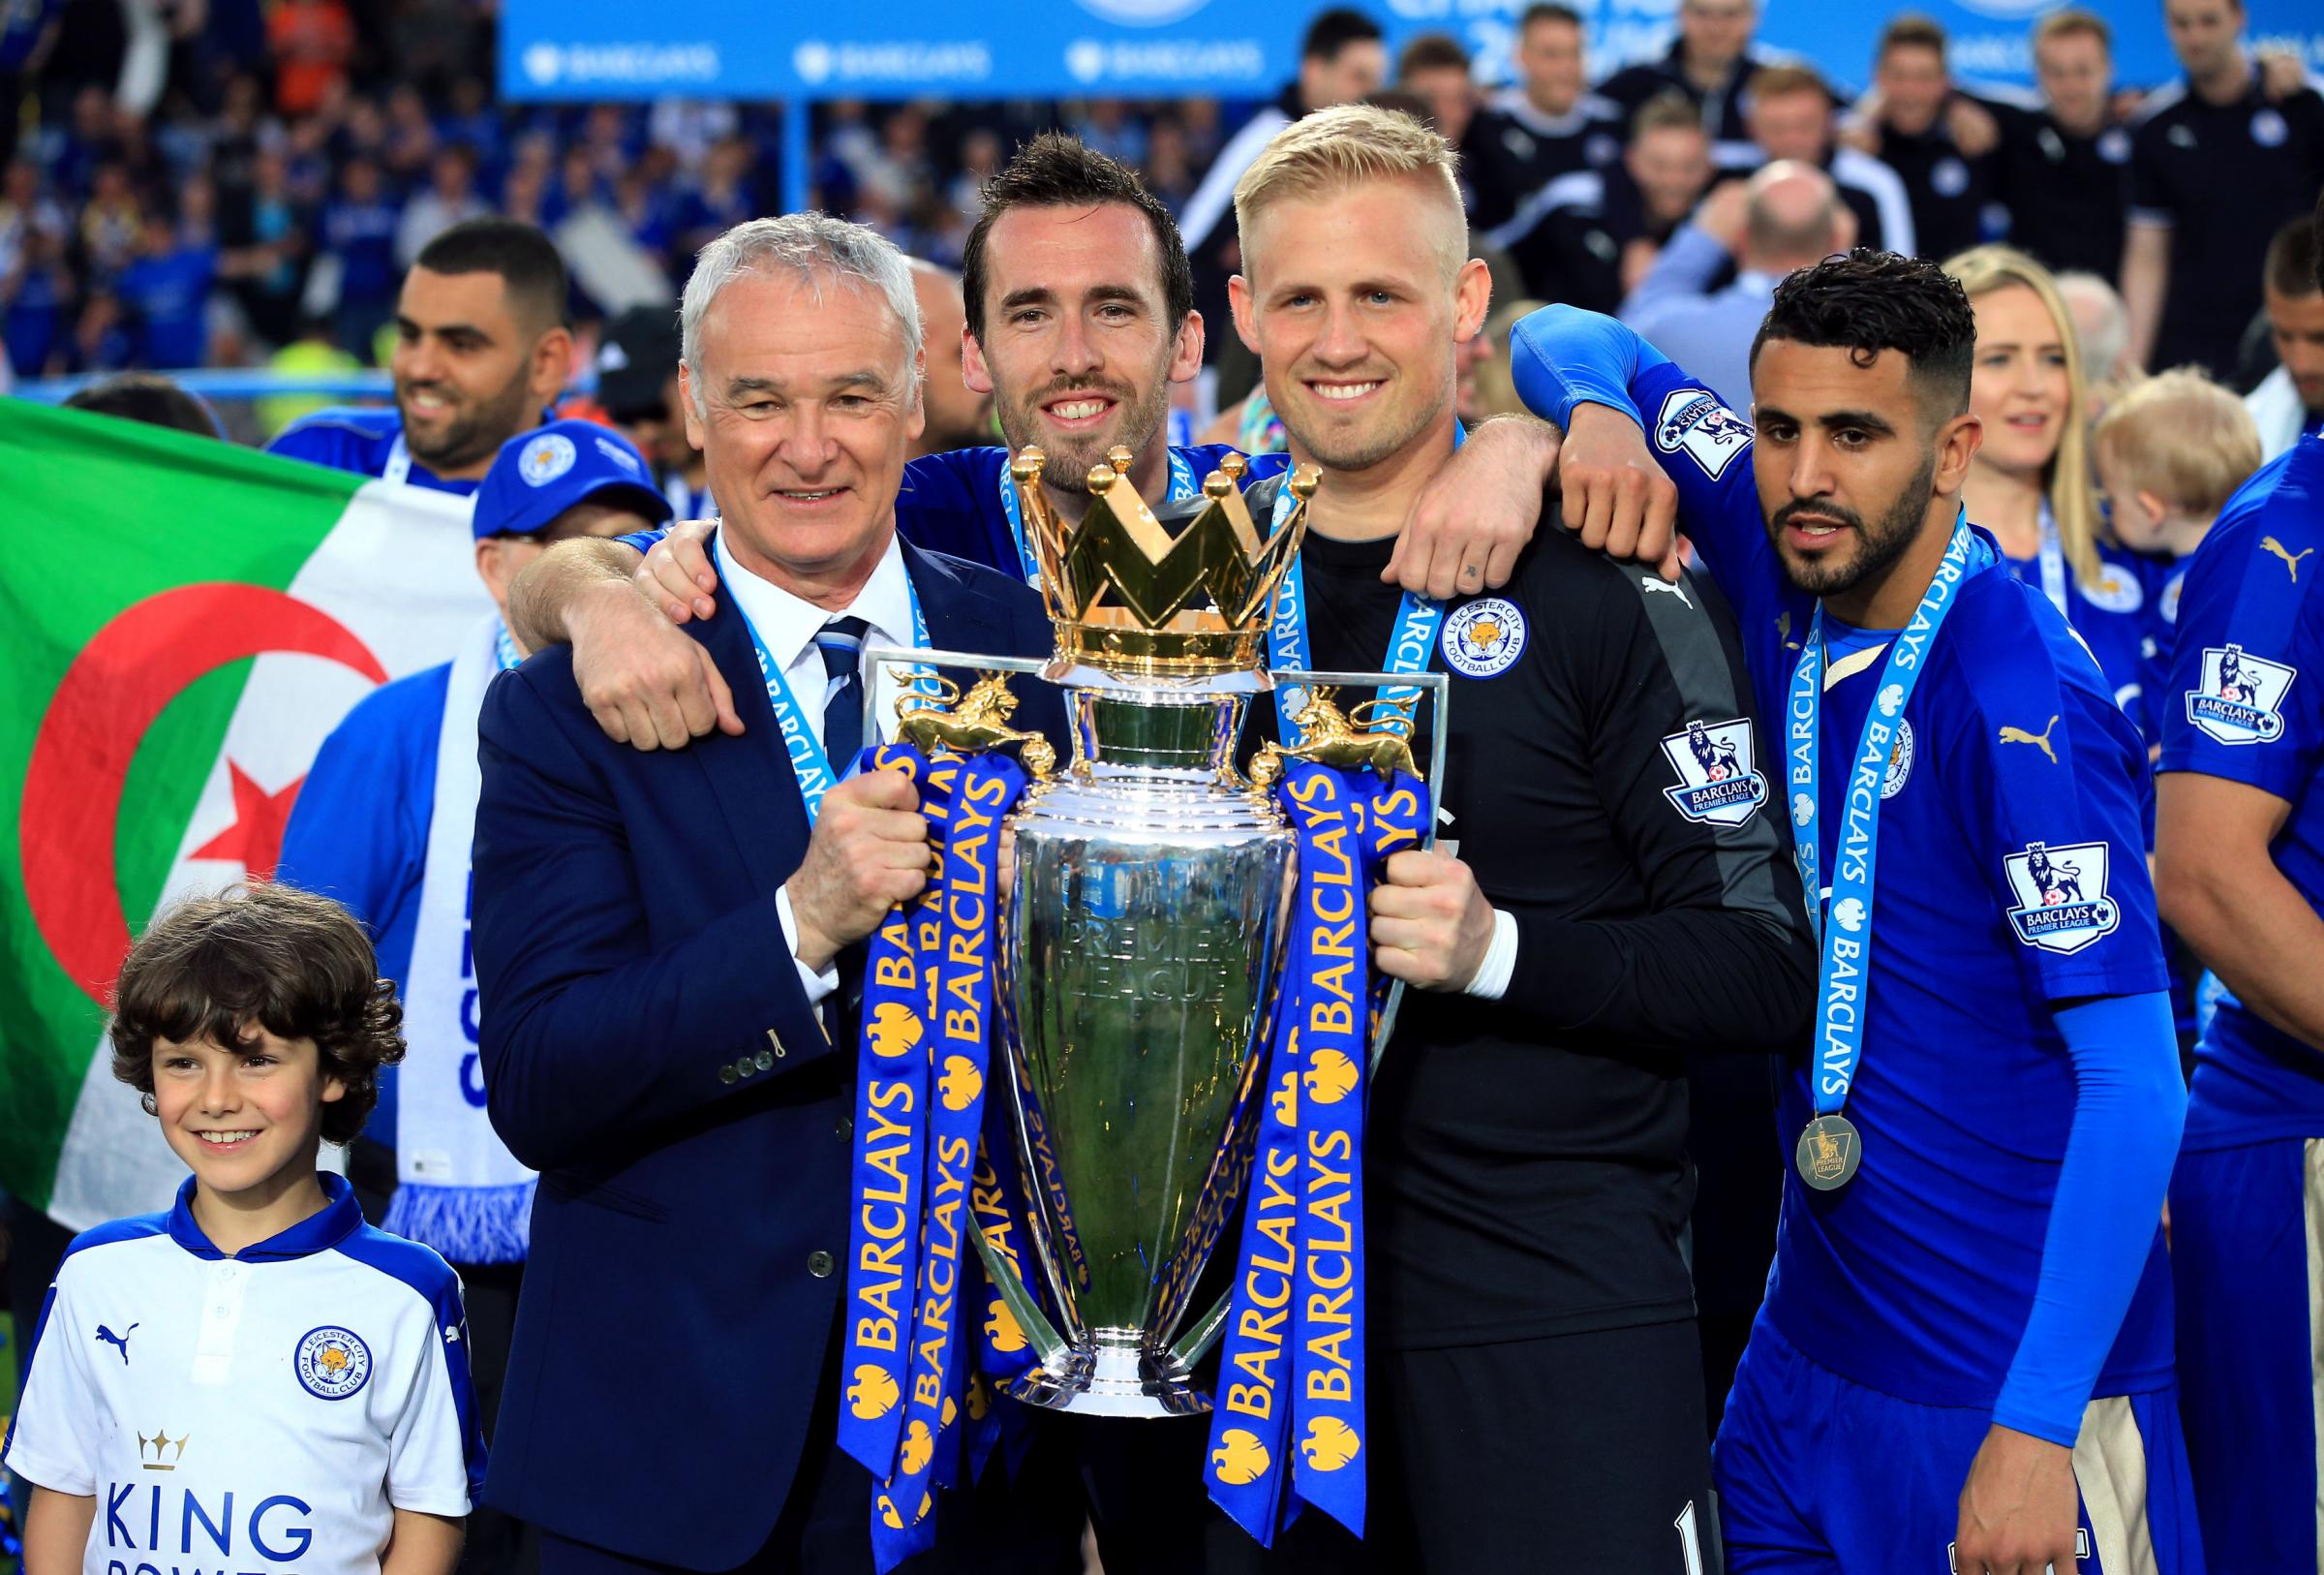 Then Leicester City manager Claudio Ranieri (left), Christian Fuchs (centre), Kasper Schmeichel and Riyad Mahrez (right) with the PL trophy in May 2016. A year earlier, under Nigel Pearson, the club avoided relegation over winning seven of their last